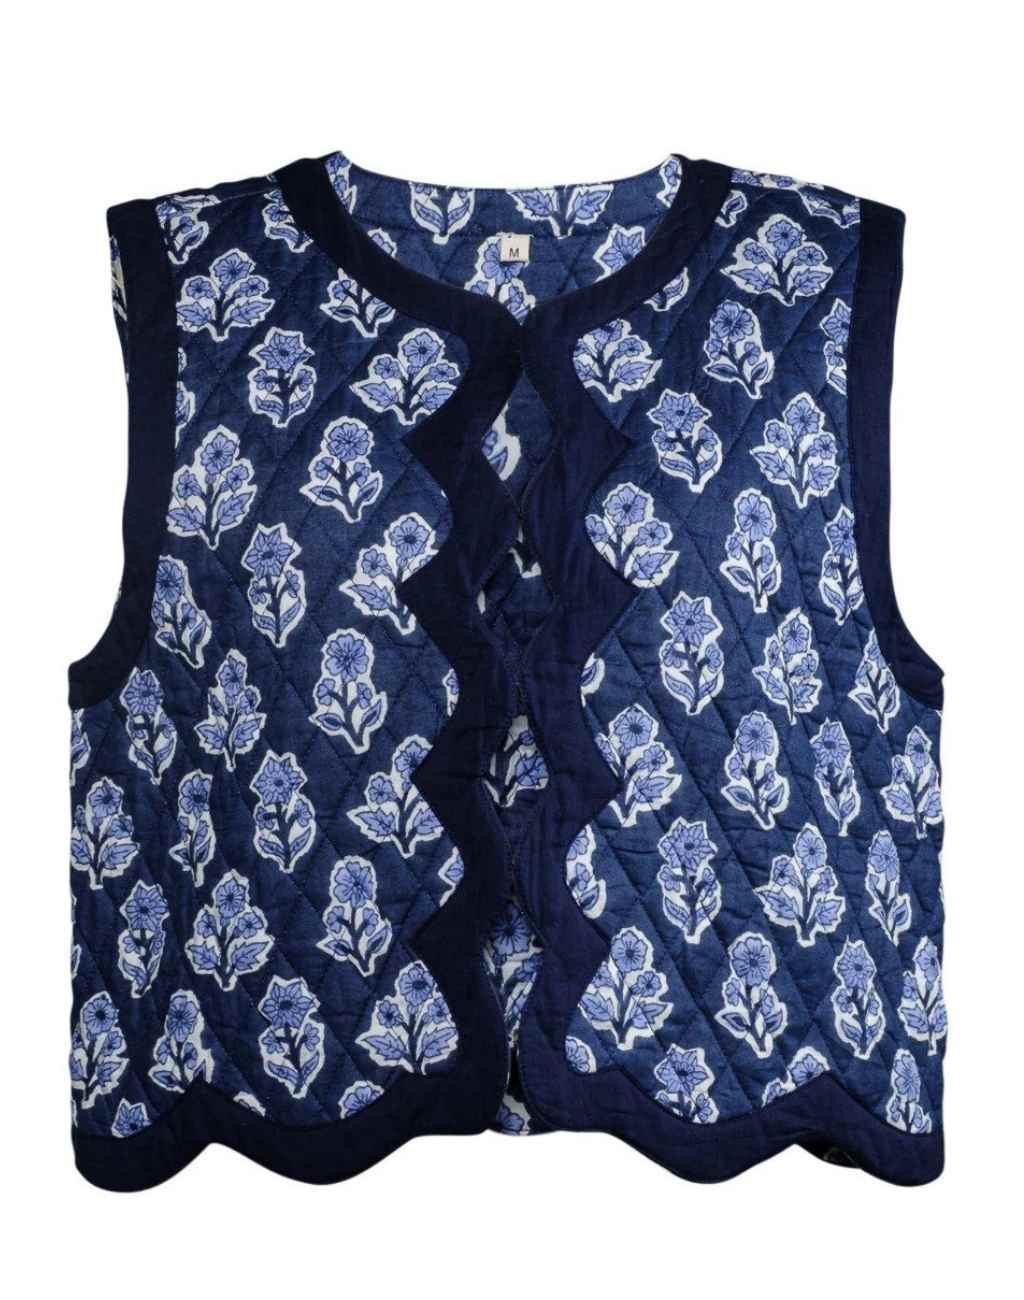 Blockprint Celest Vest in Navy Floral with Precious Scalloped Border